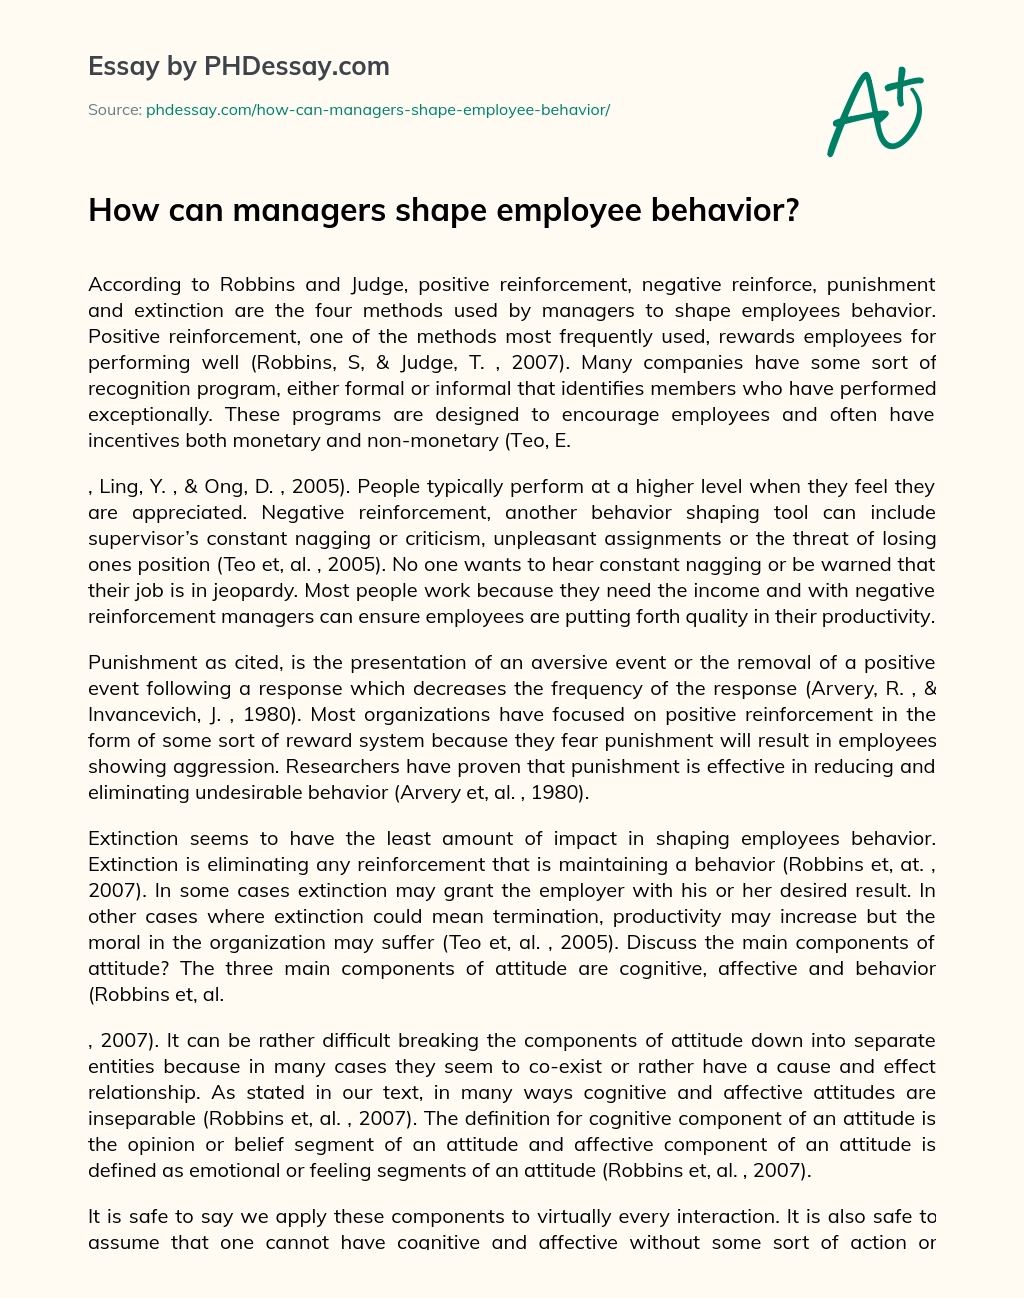 How can managers shape employee behavior? essay